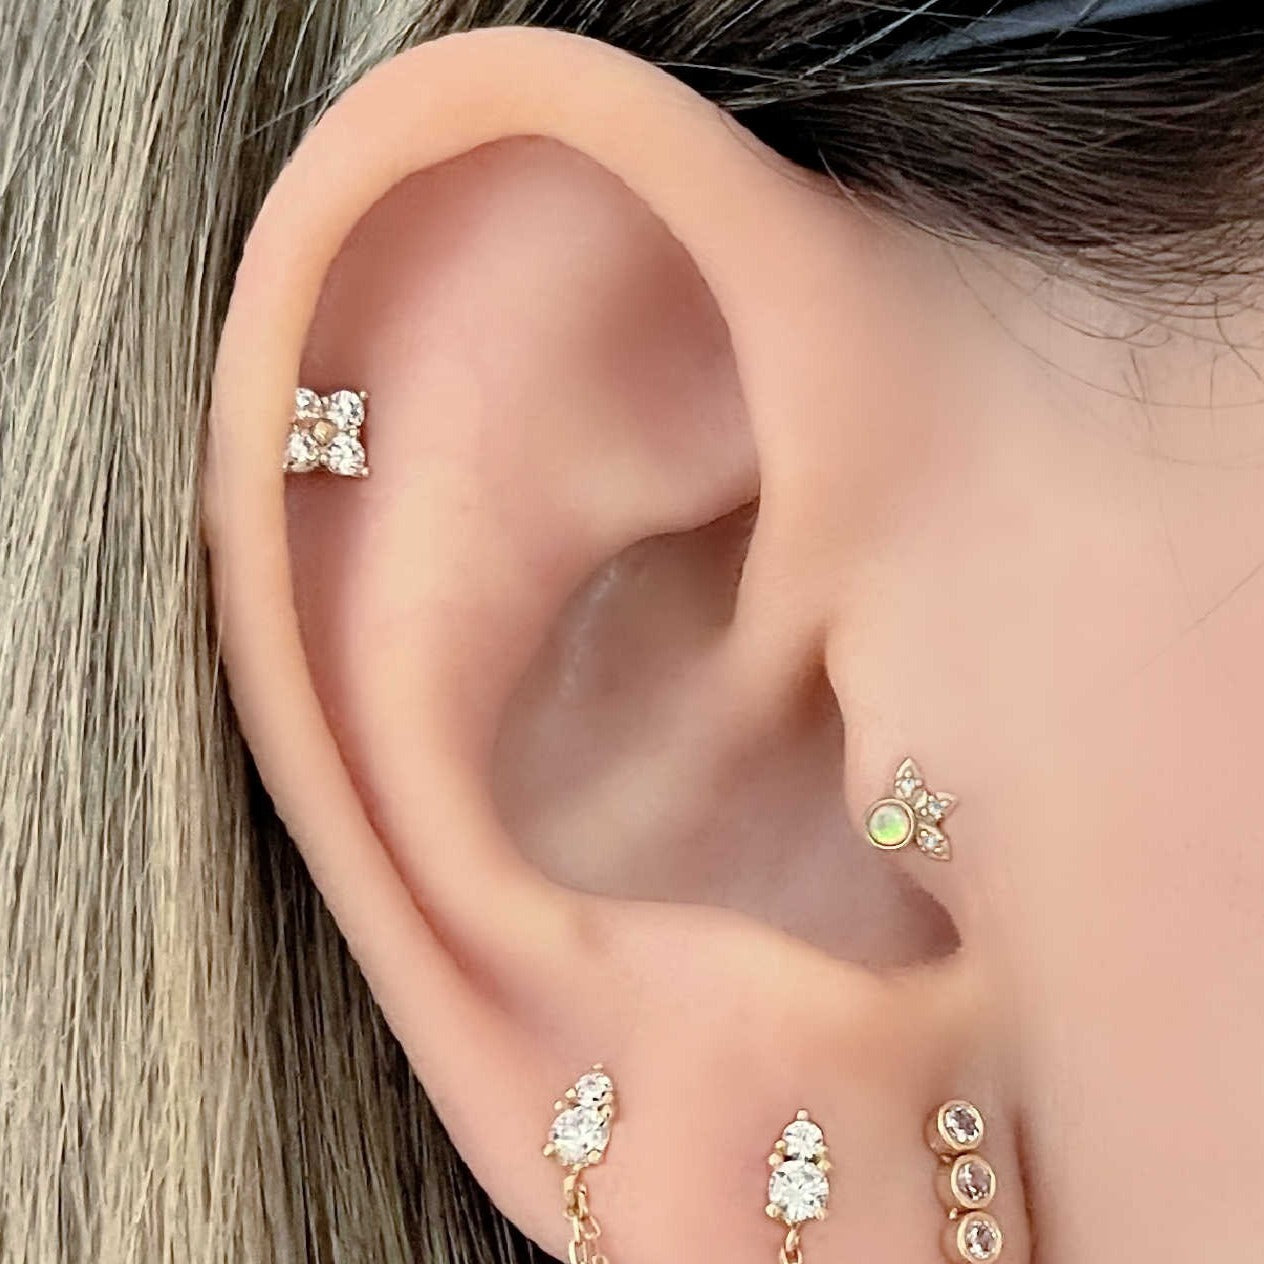 Please help!! I think my earring is stuck in my ear under swelling but I  don't know! I've had this lobe for about 5 weeks and today it just started  bothering me